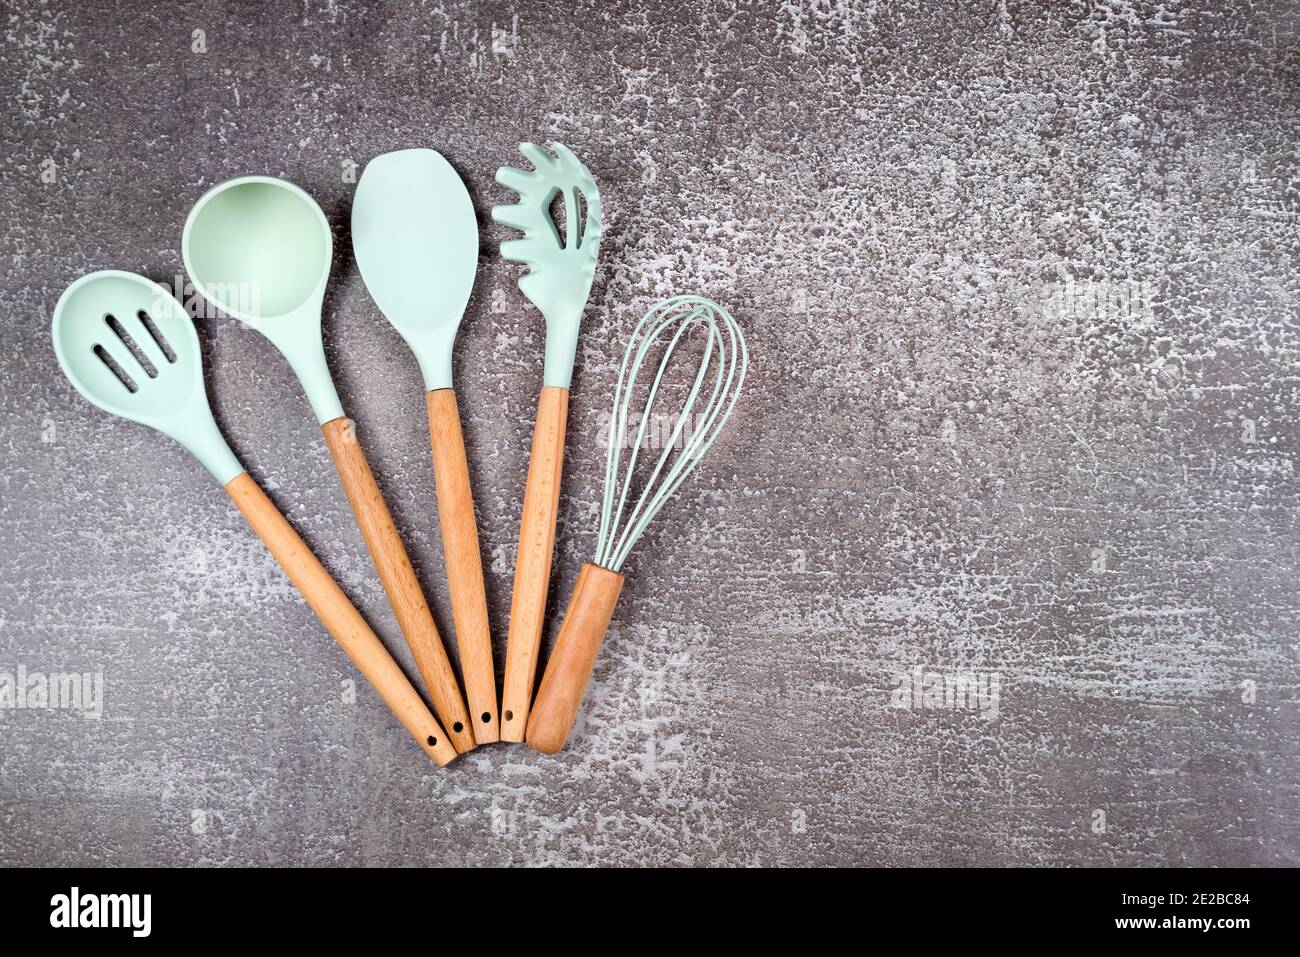 https://c8.alamy.com/comp/2E2BC84/kitchen-utensils-home-kitchen-tools-mint-rubber-accessories-on-dark-background-restaurant-cooking-culinary-kitchen-theme-silicone-spatulas-and-2E2BC84.jpg